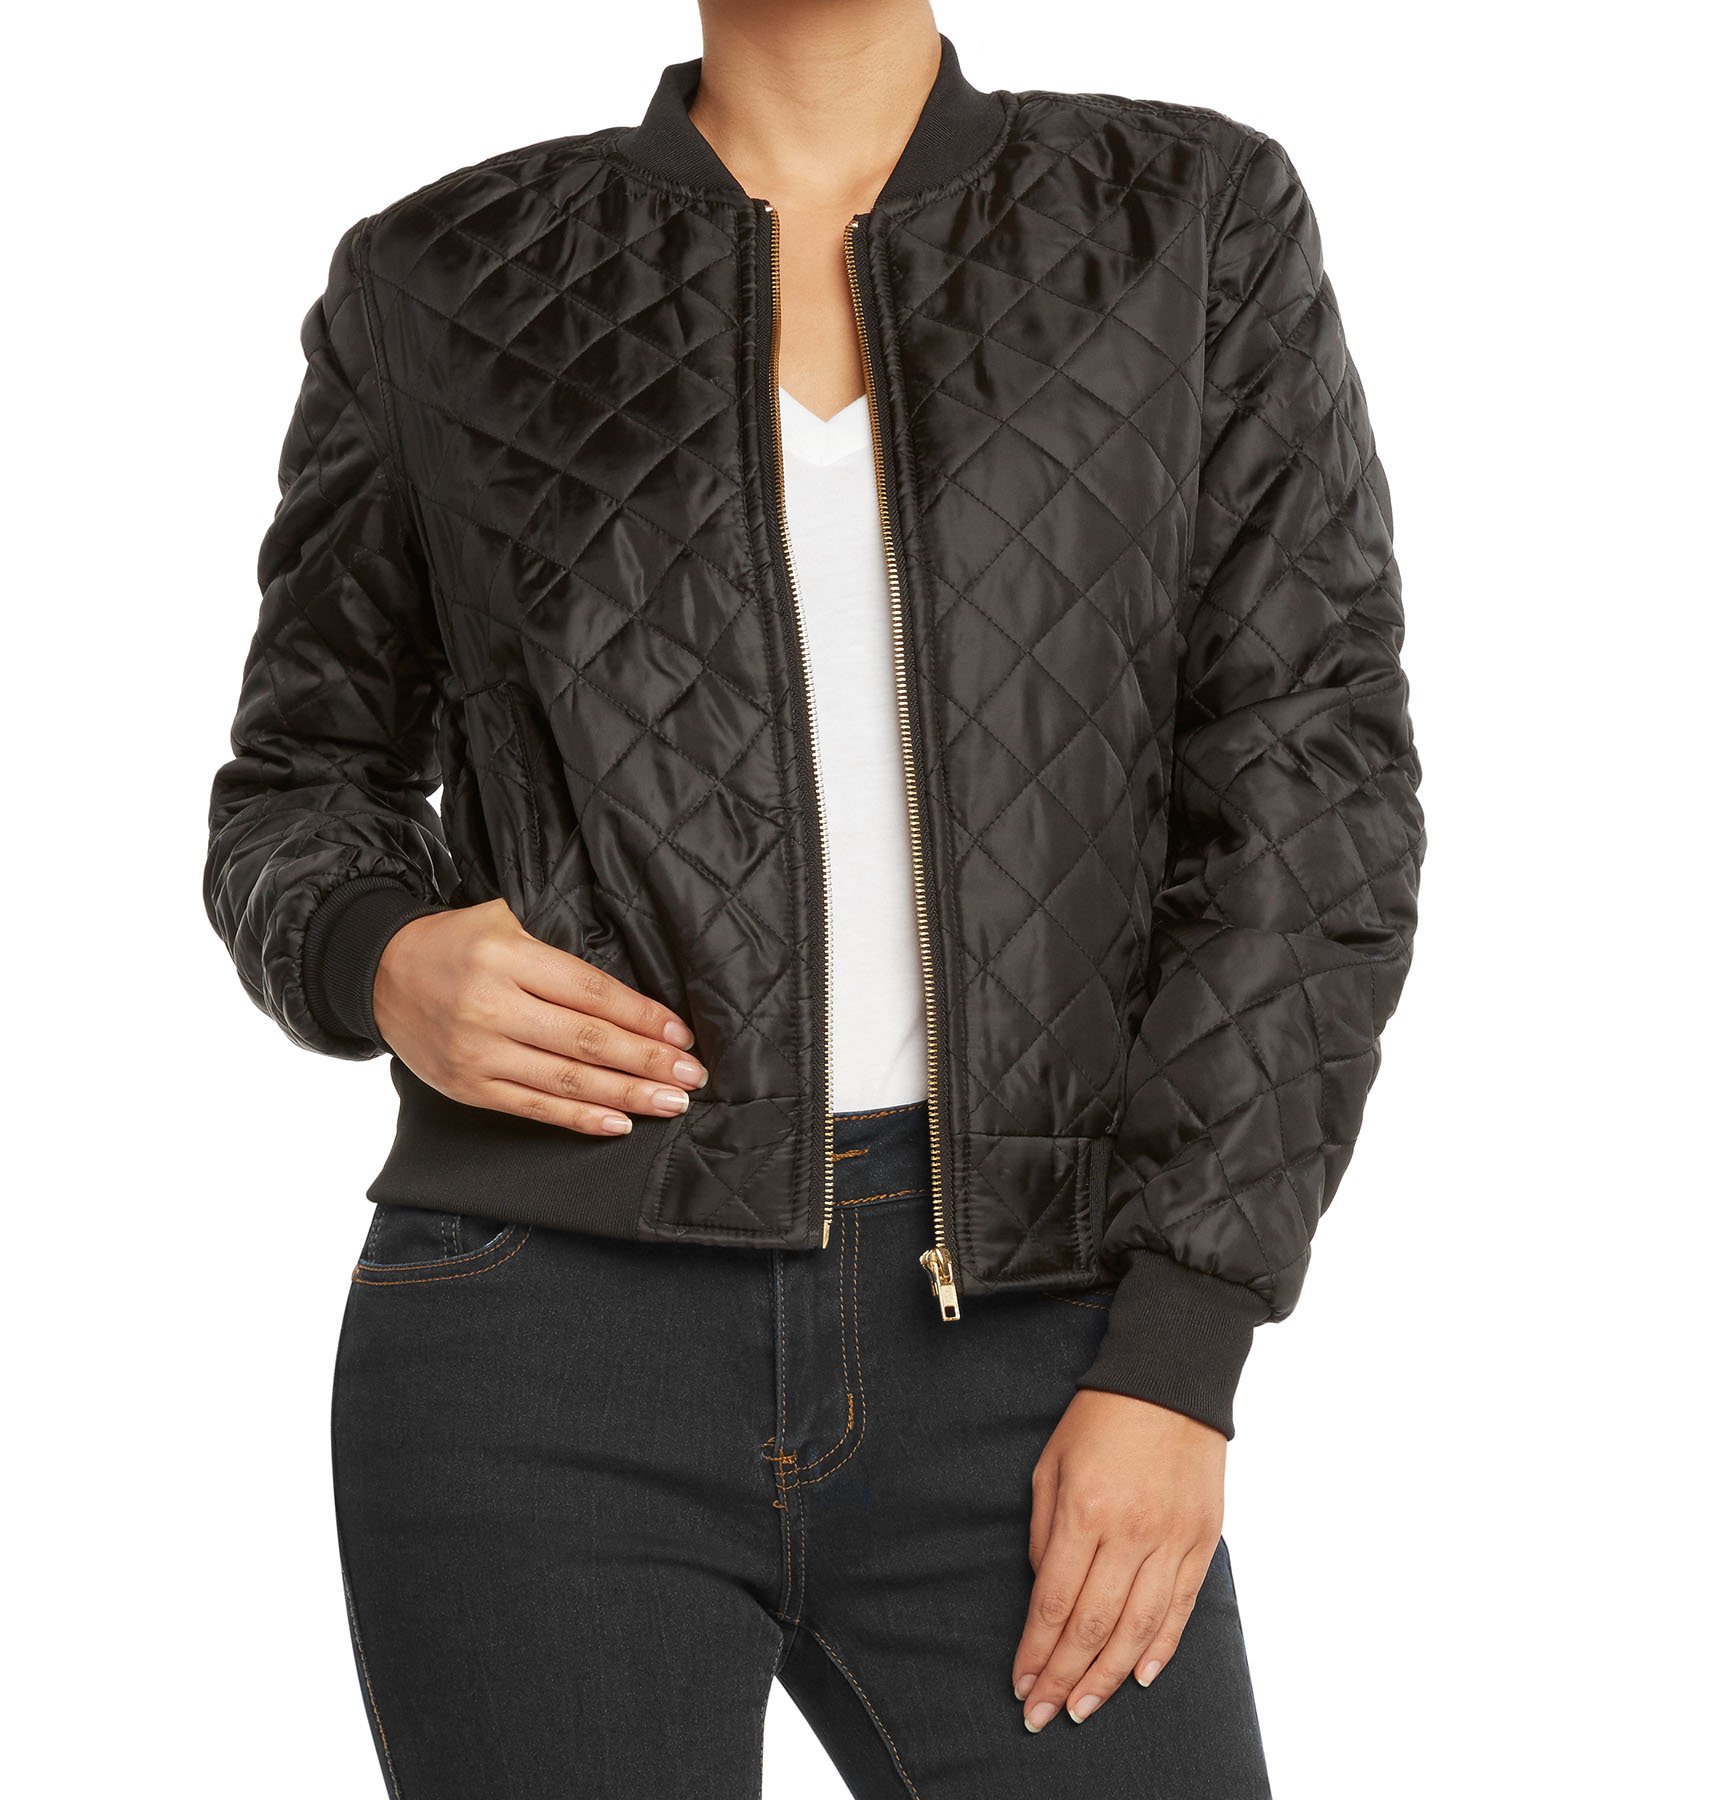 AG Womens Quilted Bomber Jacket by 9 Crowns Essentials | eBay